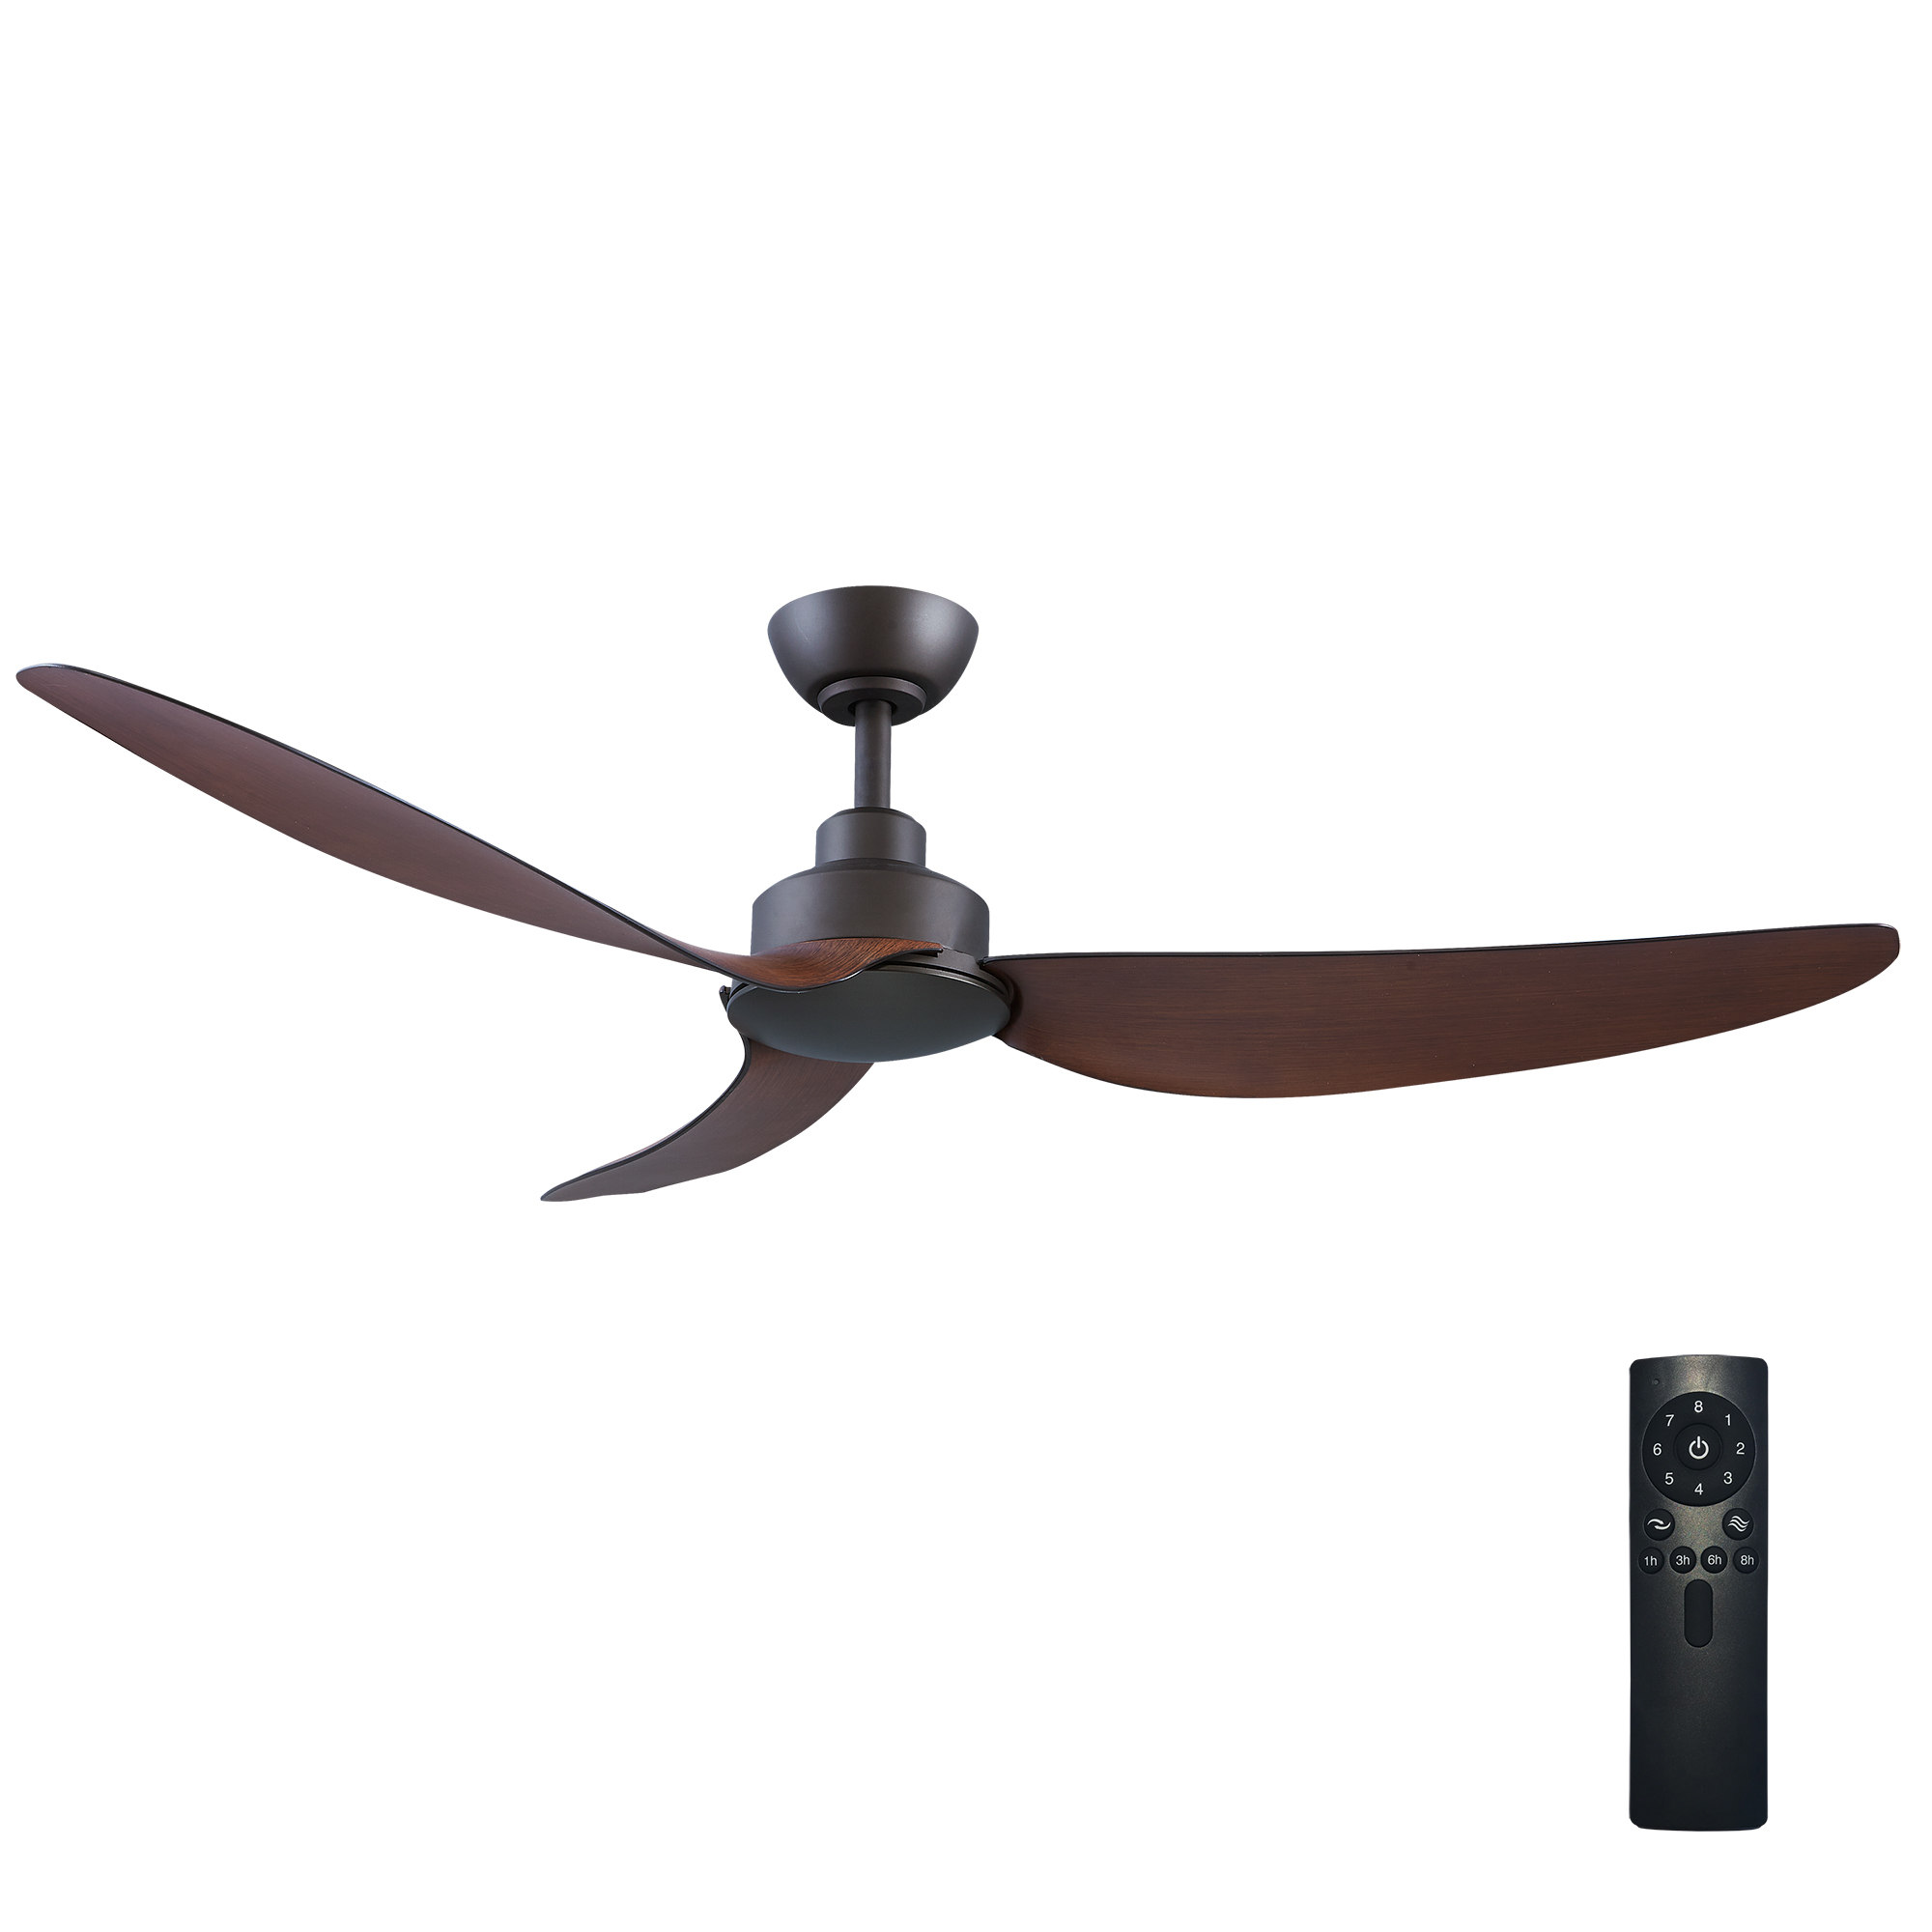 56" Trinity V3 DC Ceiling Fan in Oil-rubbed Bronze with Koa blades